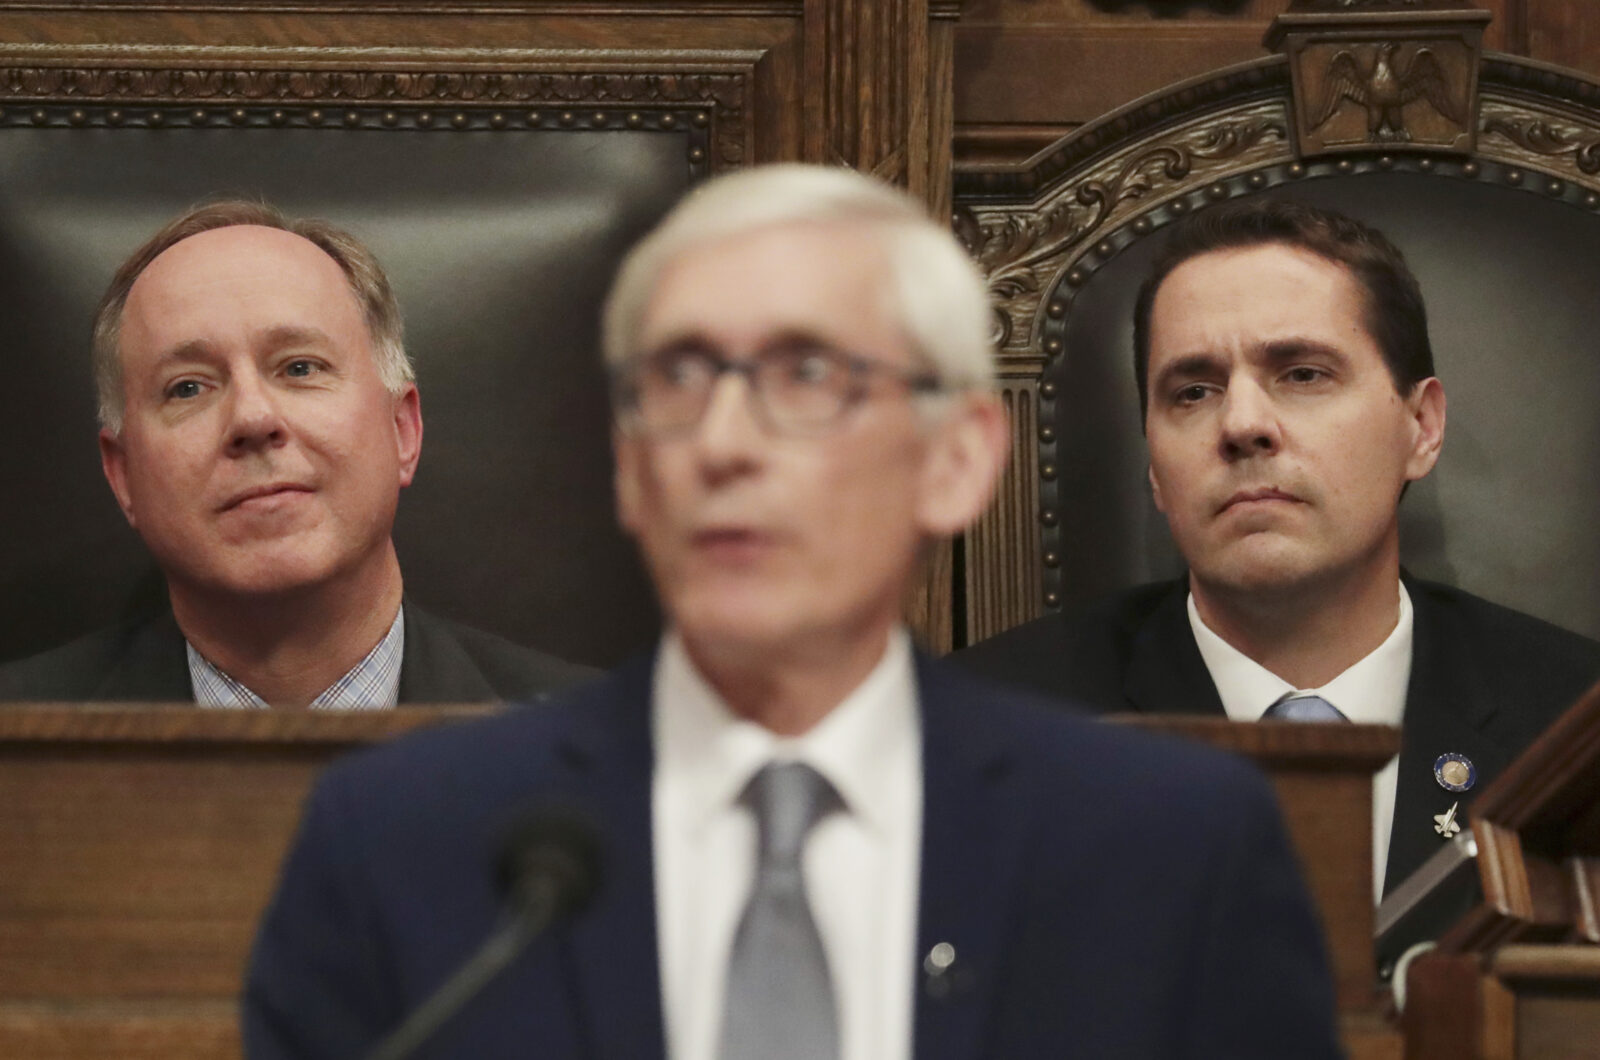 In this Jan. 22, 2020, file photo, Wisconsin Assembly Speaker Robin Vos, R-Rochester, left, and Wisconsin Senate President Roger Roth, R-Appleton, right, look on as Gov. Tony Evers delivers his State of the State address at the Wisconsin state Capitol in Madison, Wis. Gov. Evers signed a bipartisan tax cut bill into law on Feb. 18, 2021, and signaled support for another bipartisan measure to help update the state's unemployment insurance system, rare compromises that come as Republicans have roundly denounced much of his state budget proposal as a liberal wish list. (Amber Arnold/Wisconsin State Journal via AP, File)